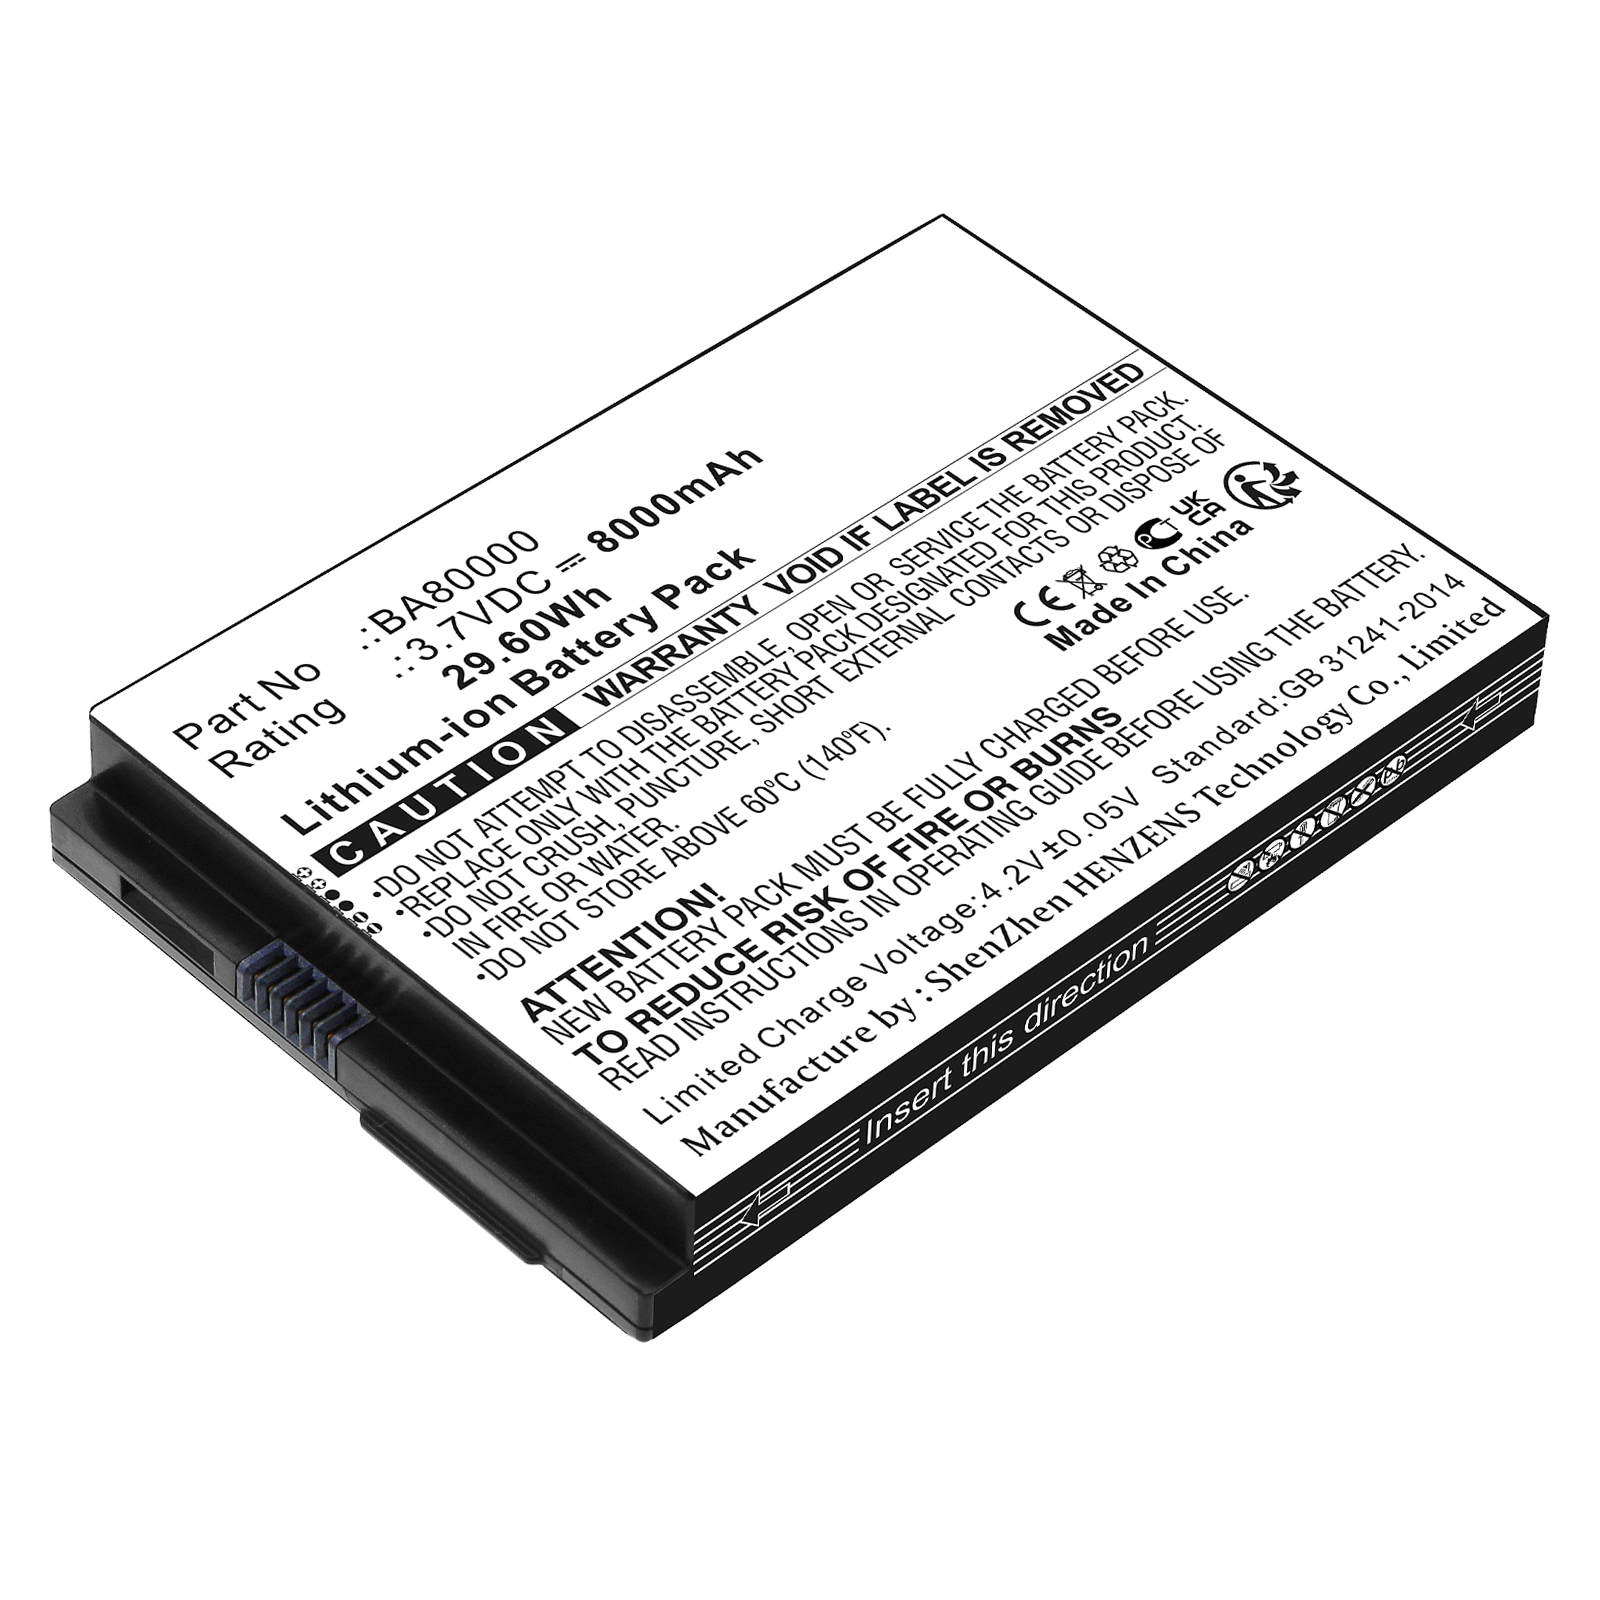 Synergy Digital Tablet Battery, Compatible with Touch Dynamic BA80000 Tablet Battery (Li-ion, 3.7V, 8000mAh)